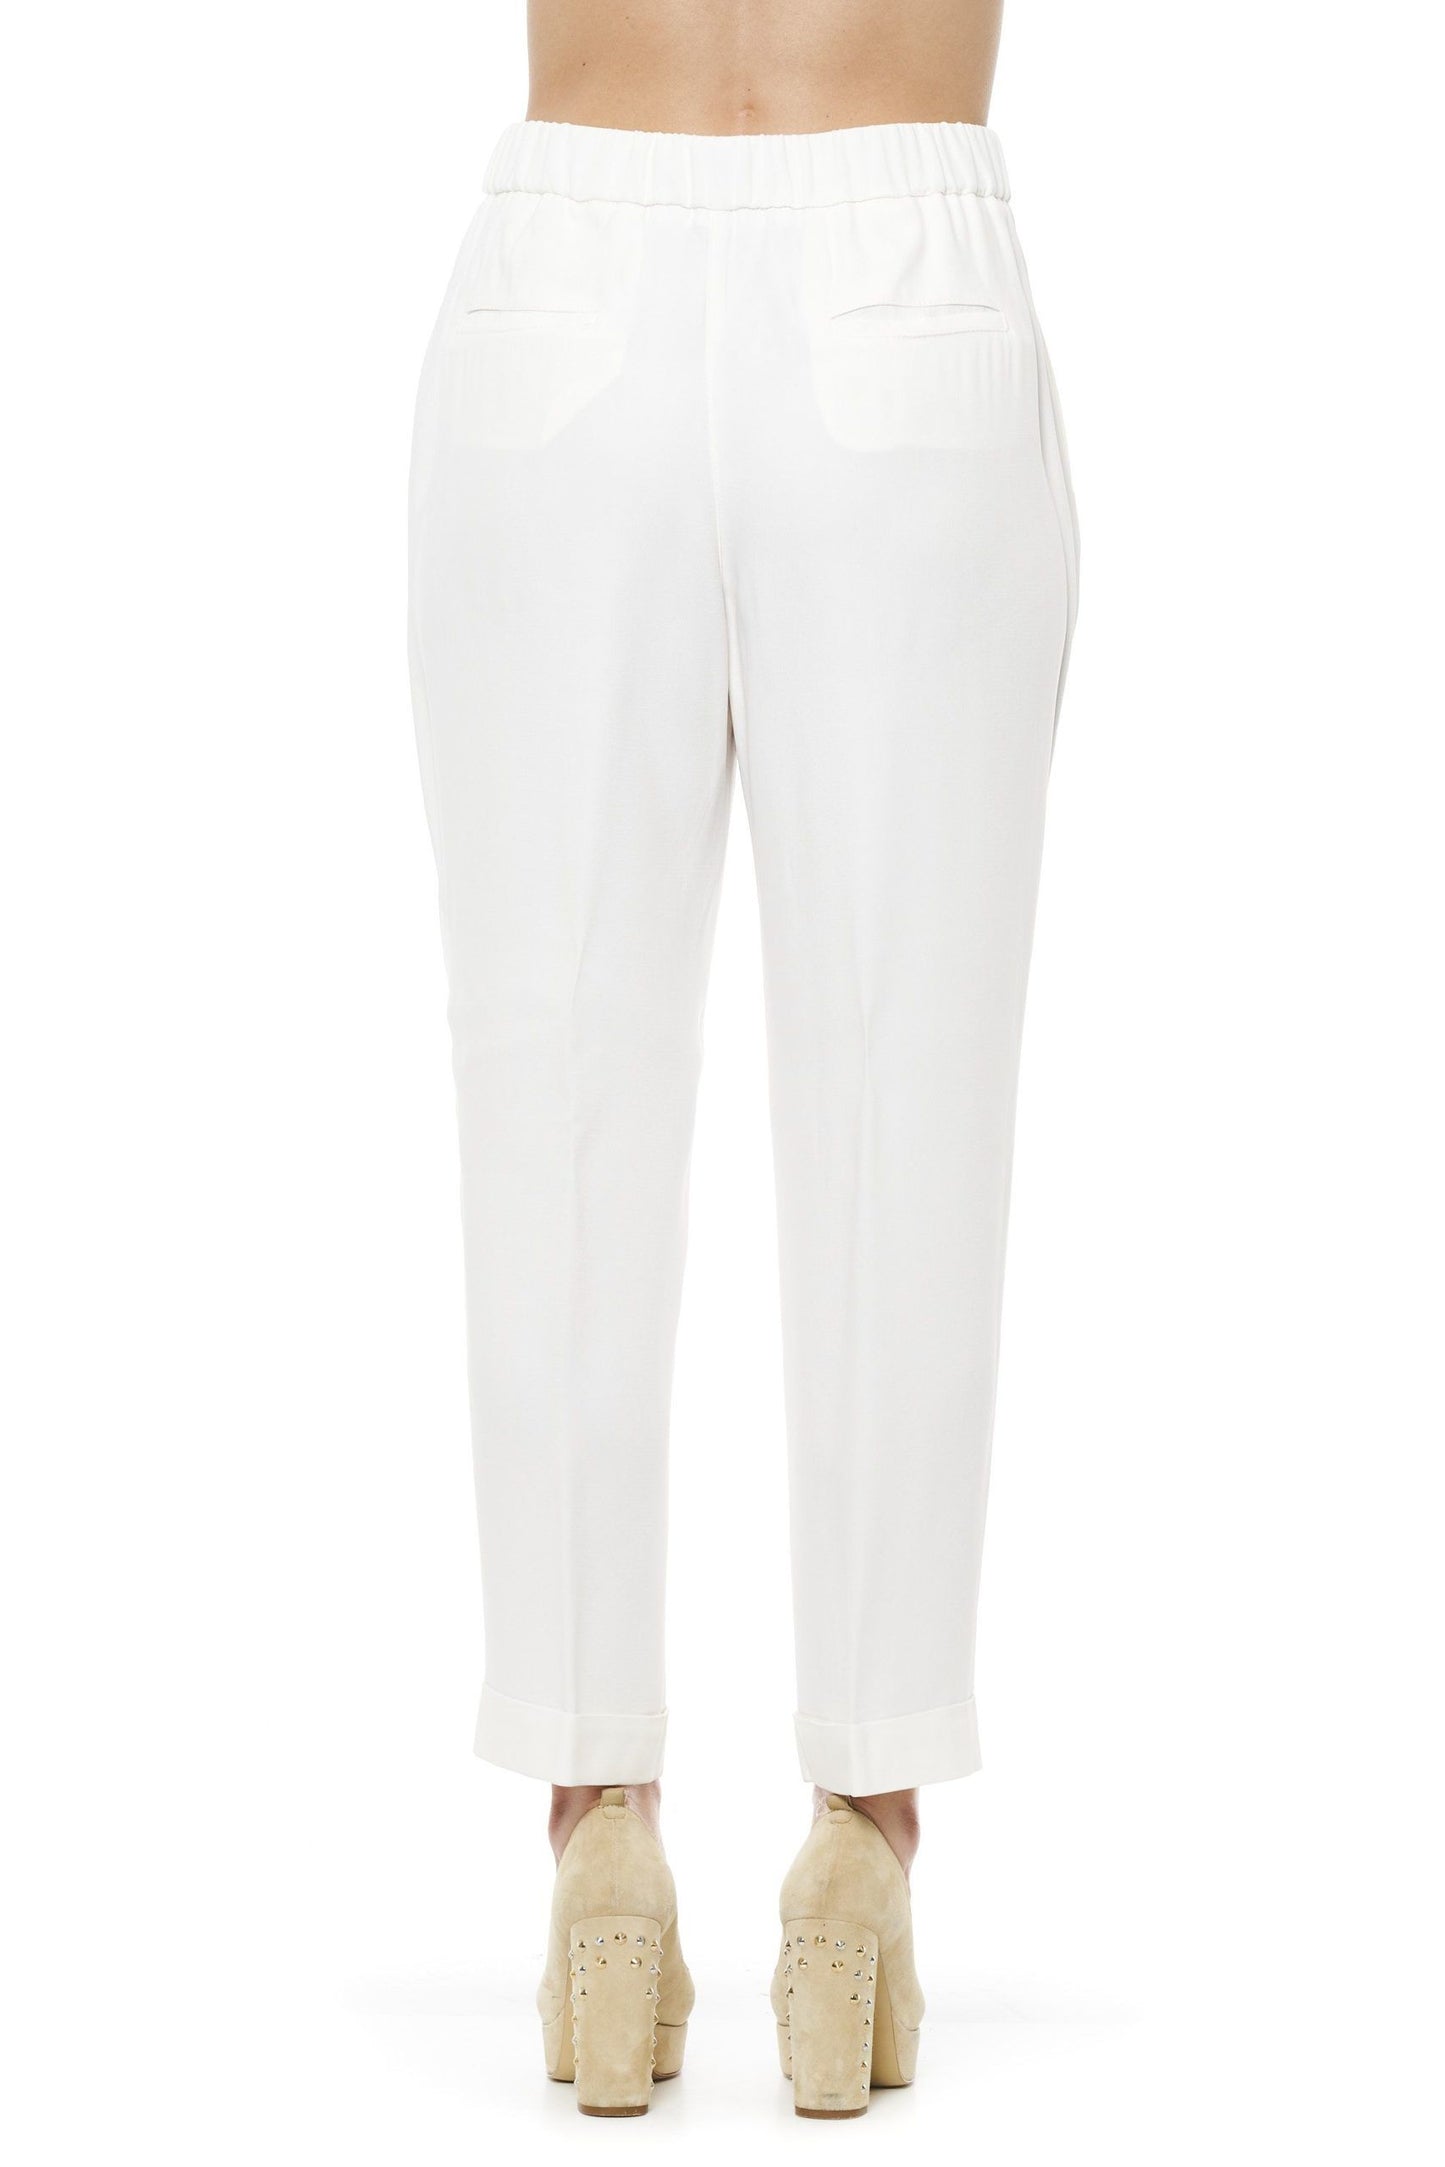 Chic White Trousers with a Comfortable Elastic Waist